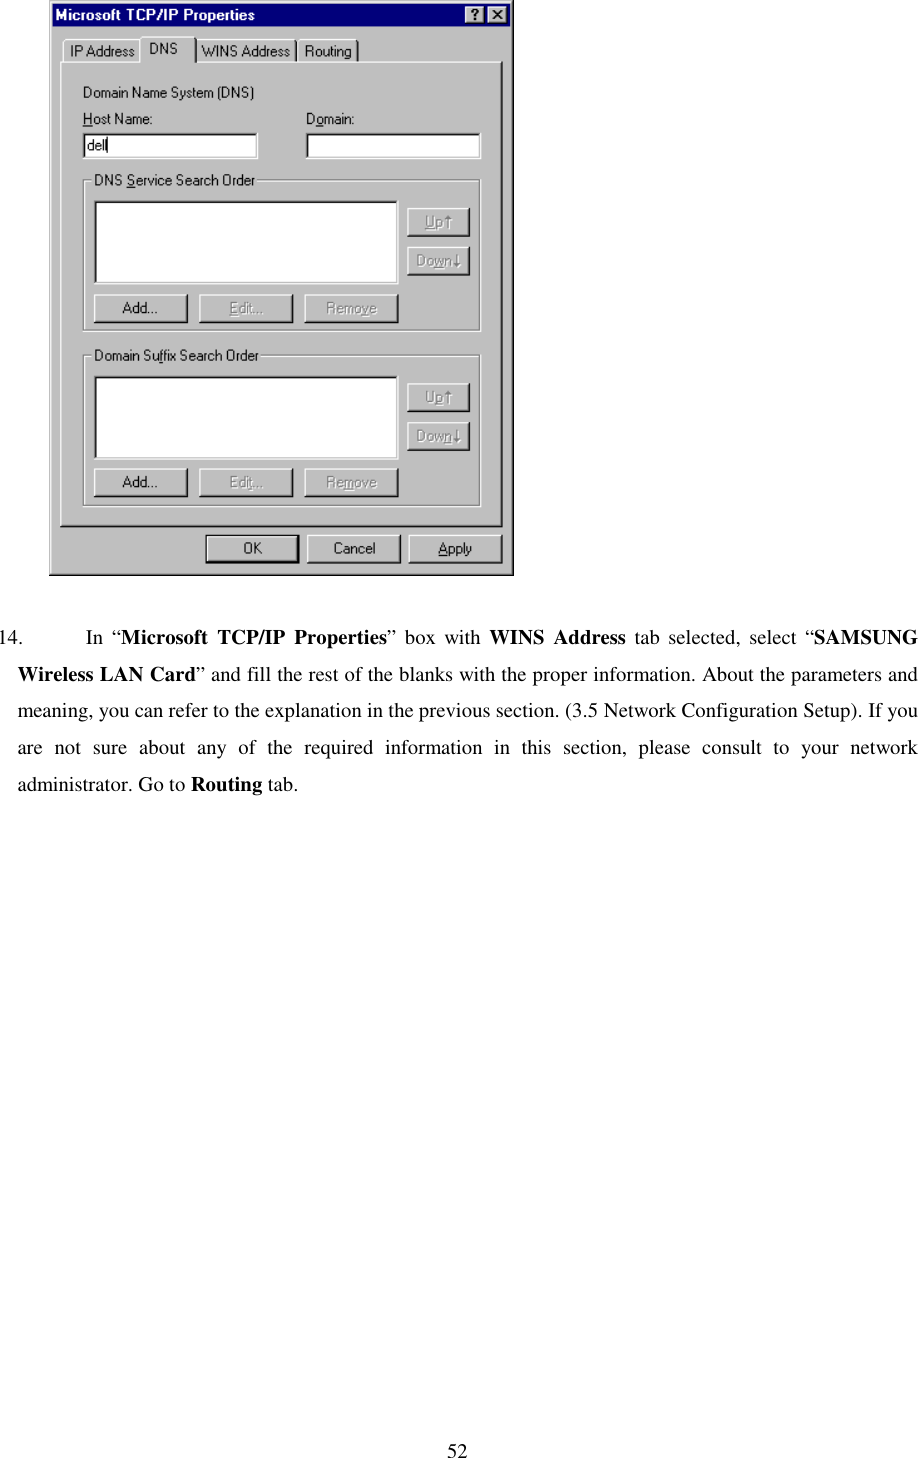   52              14. In “Microsoft TCP/IP Properties” box with WINS Address tab selected, select “SAMSUNG Wireless LAN Card” and fill the rest of the blanks with the proper information. About the parameters and meaning, you can refer to the explanation in the previous section. (3.5 Network Configuration Setup). If you are not sure about any of the required information in this section, please consult to your network administrator. Go to Routing tab.  